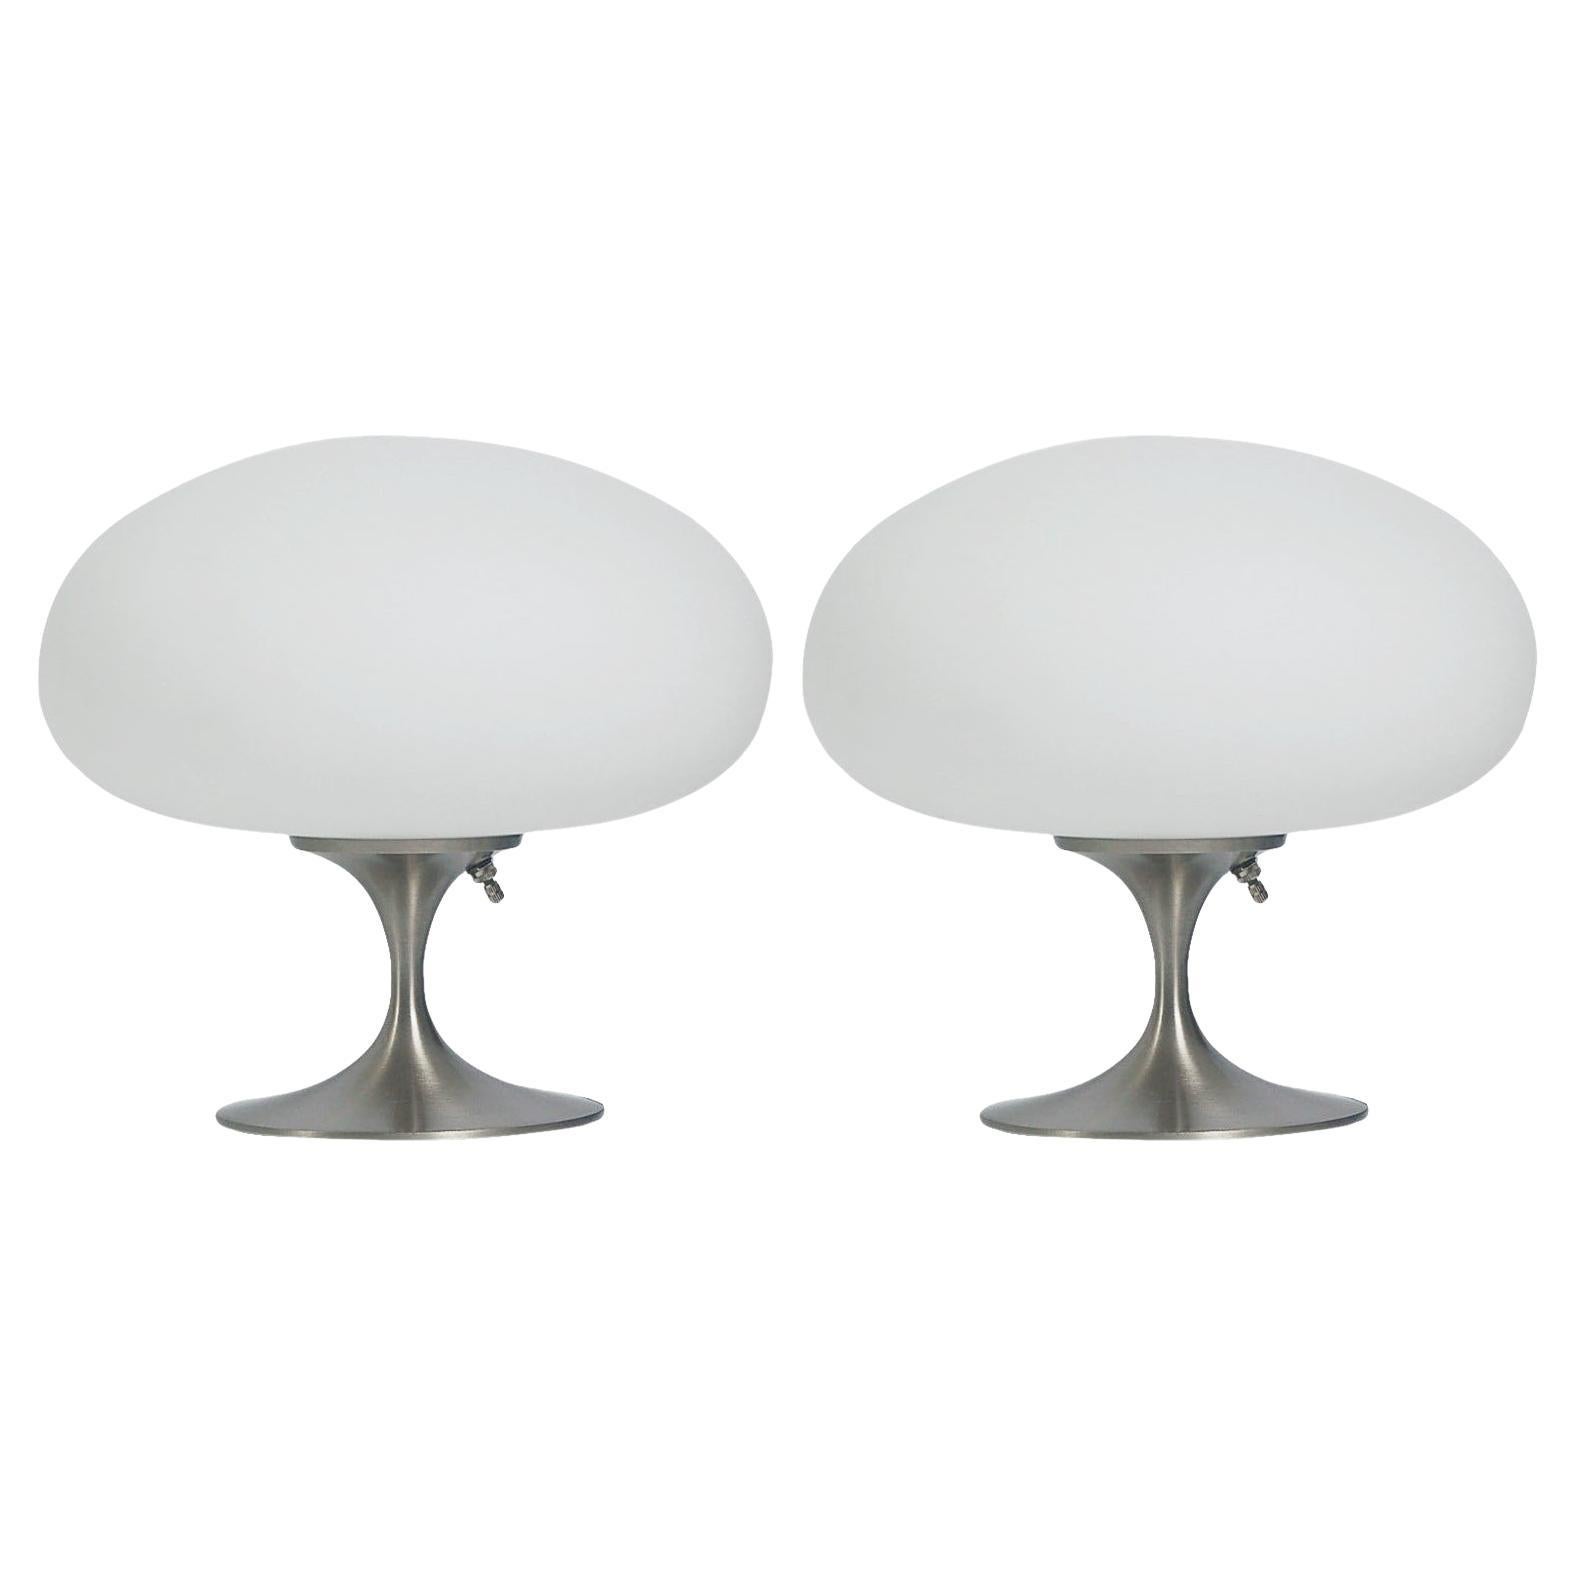 Pair of Mid Century Tulip Stemlite Lamps by Designline in Nickel & White Glass For Sale